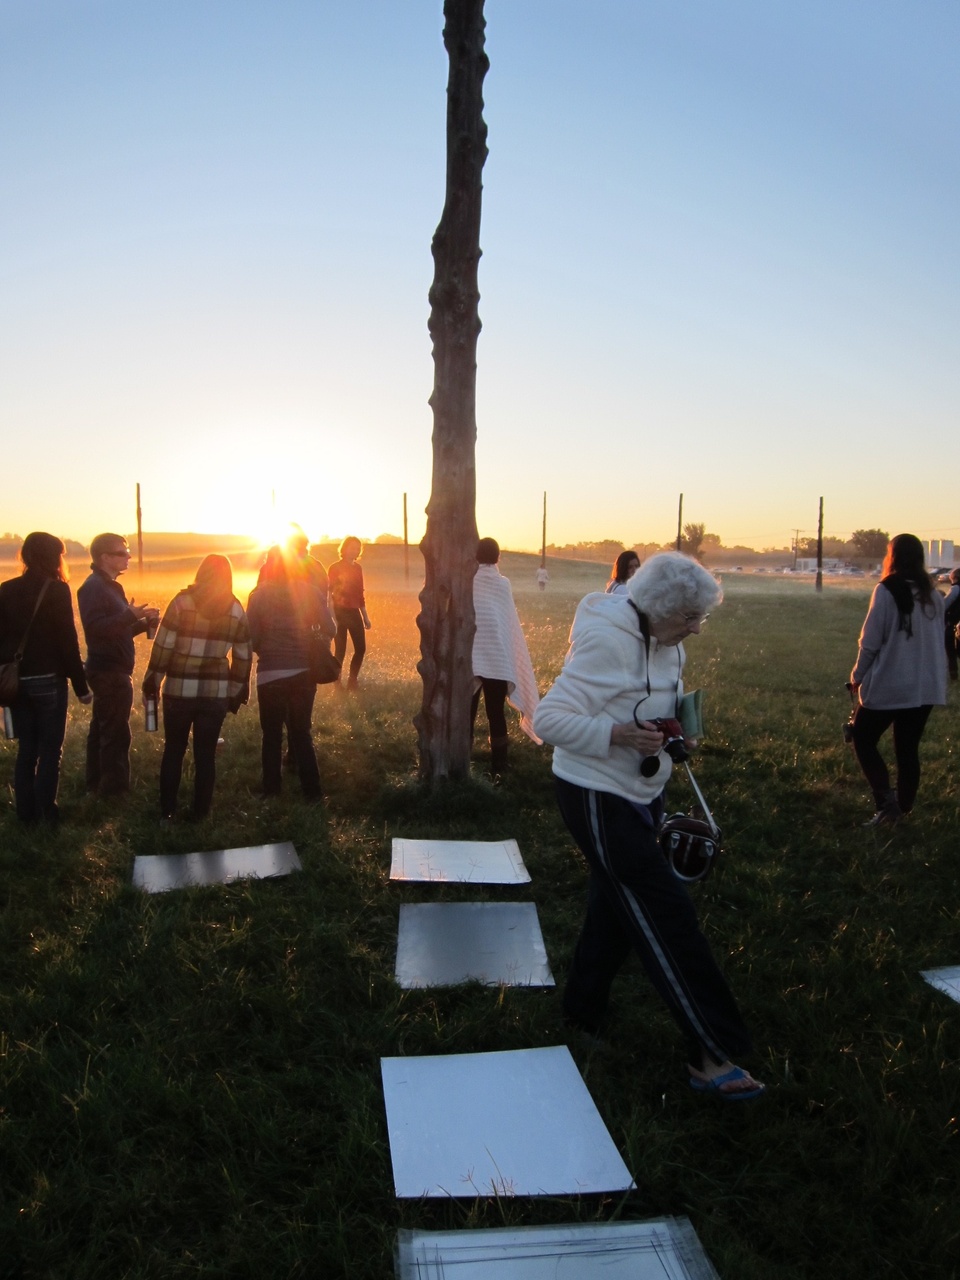 A group of people outdoors on a field in the evening with rectangular silver sheets arranged  on the ground